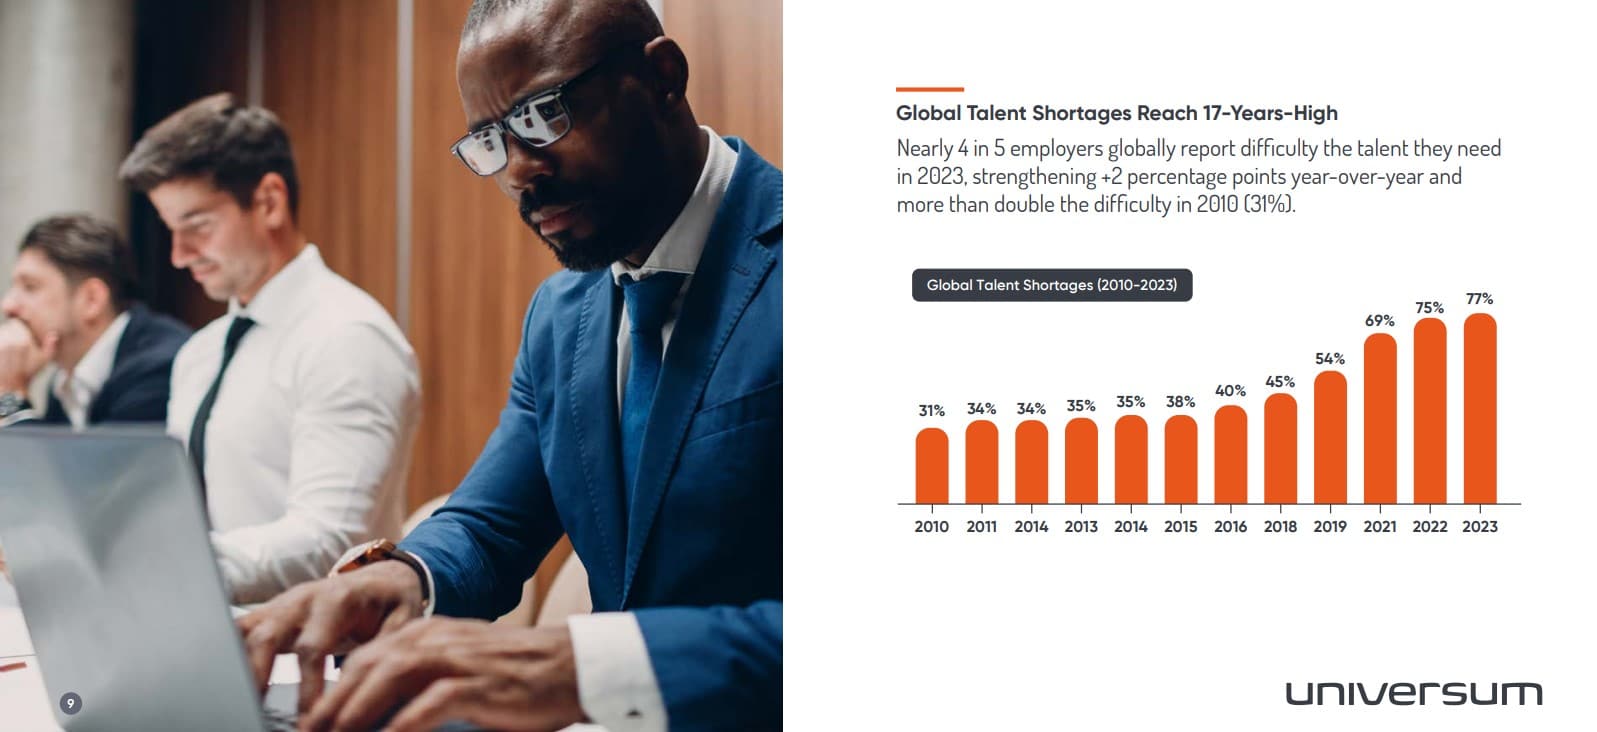 4 in 5 global hiring leaders say it’s critical that their firms improve their reputation as a place to work to attract key talent and remain competitive